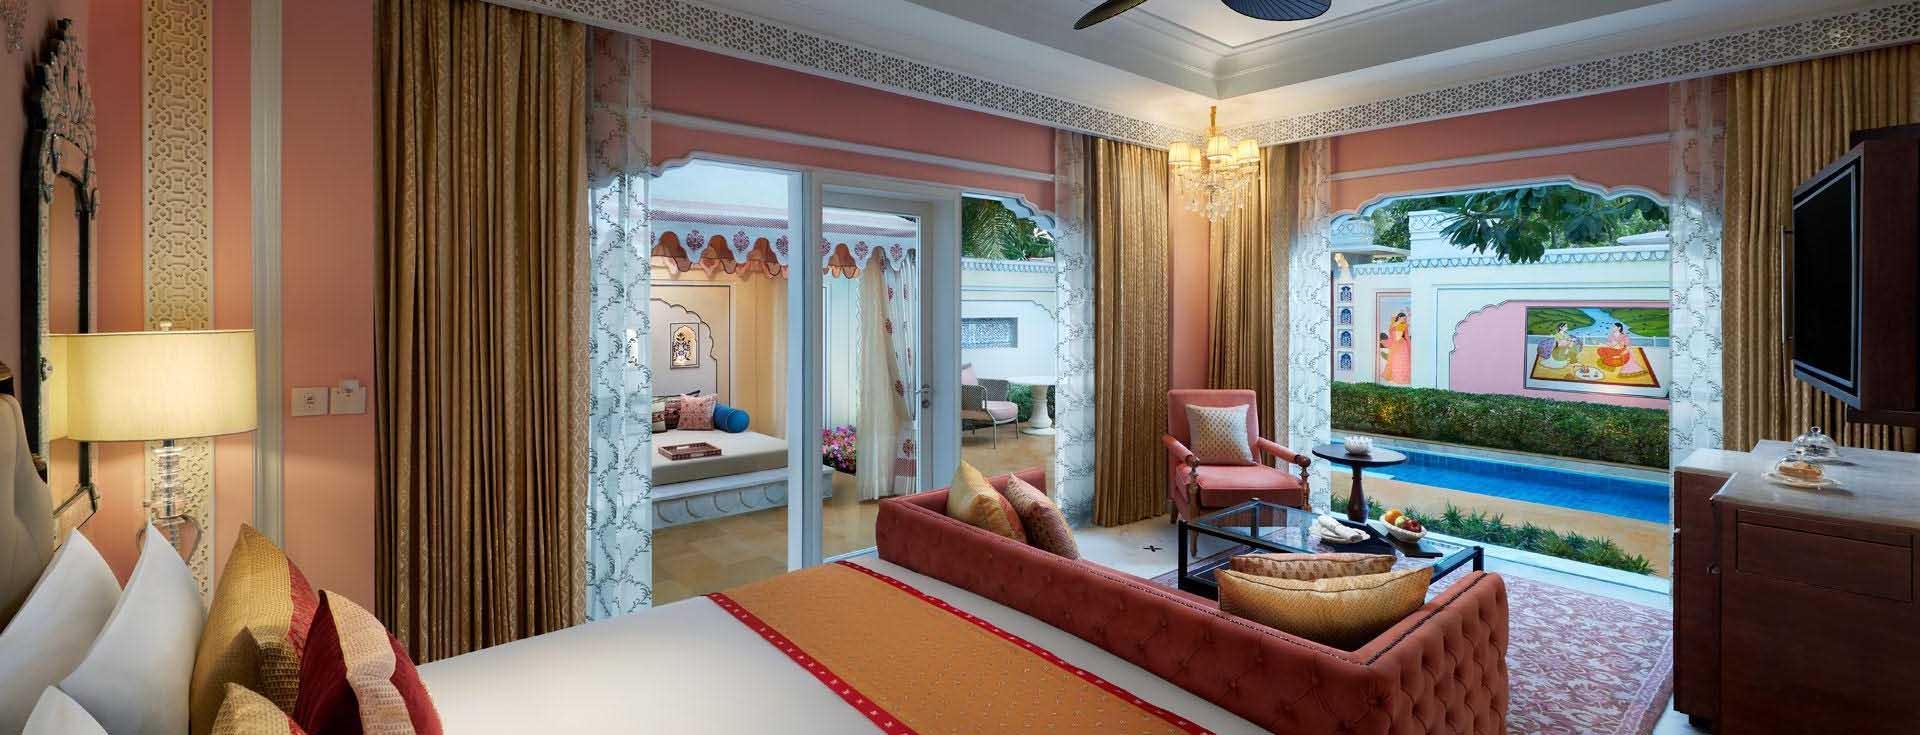 Royal Privileges Offer at The Leela Palace Jaipur